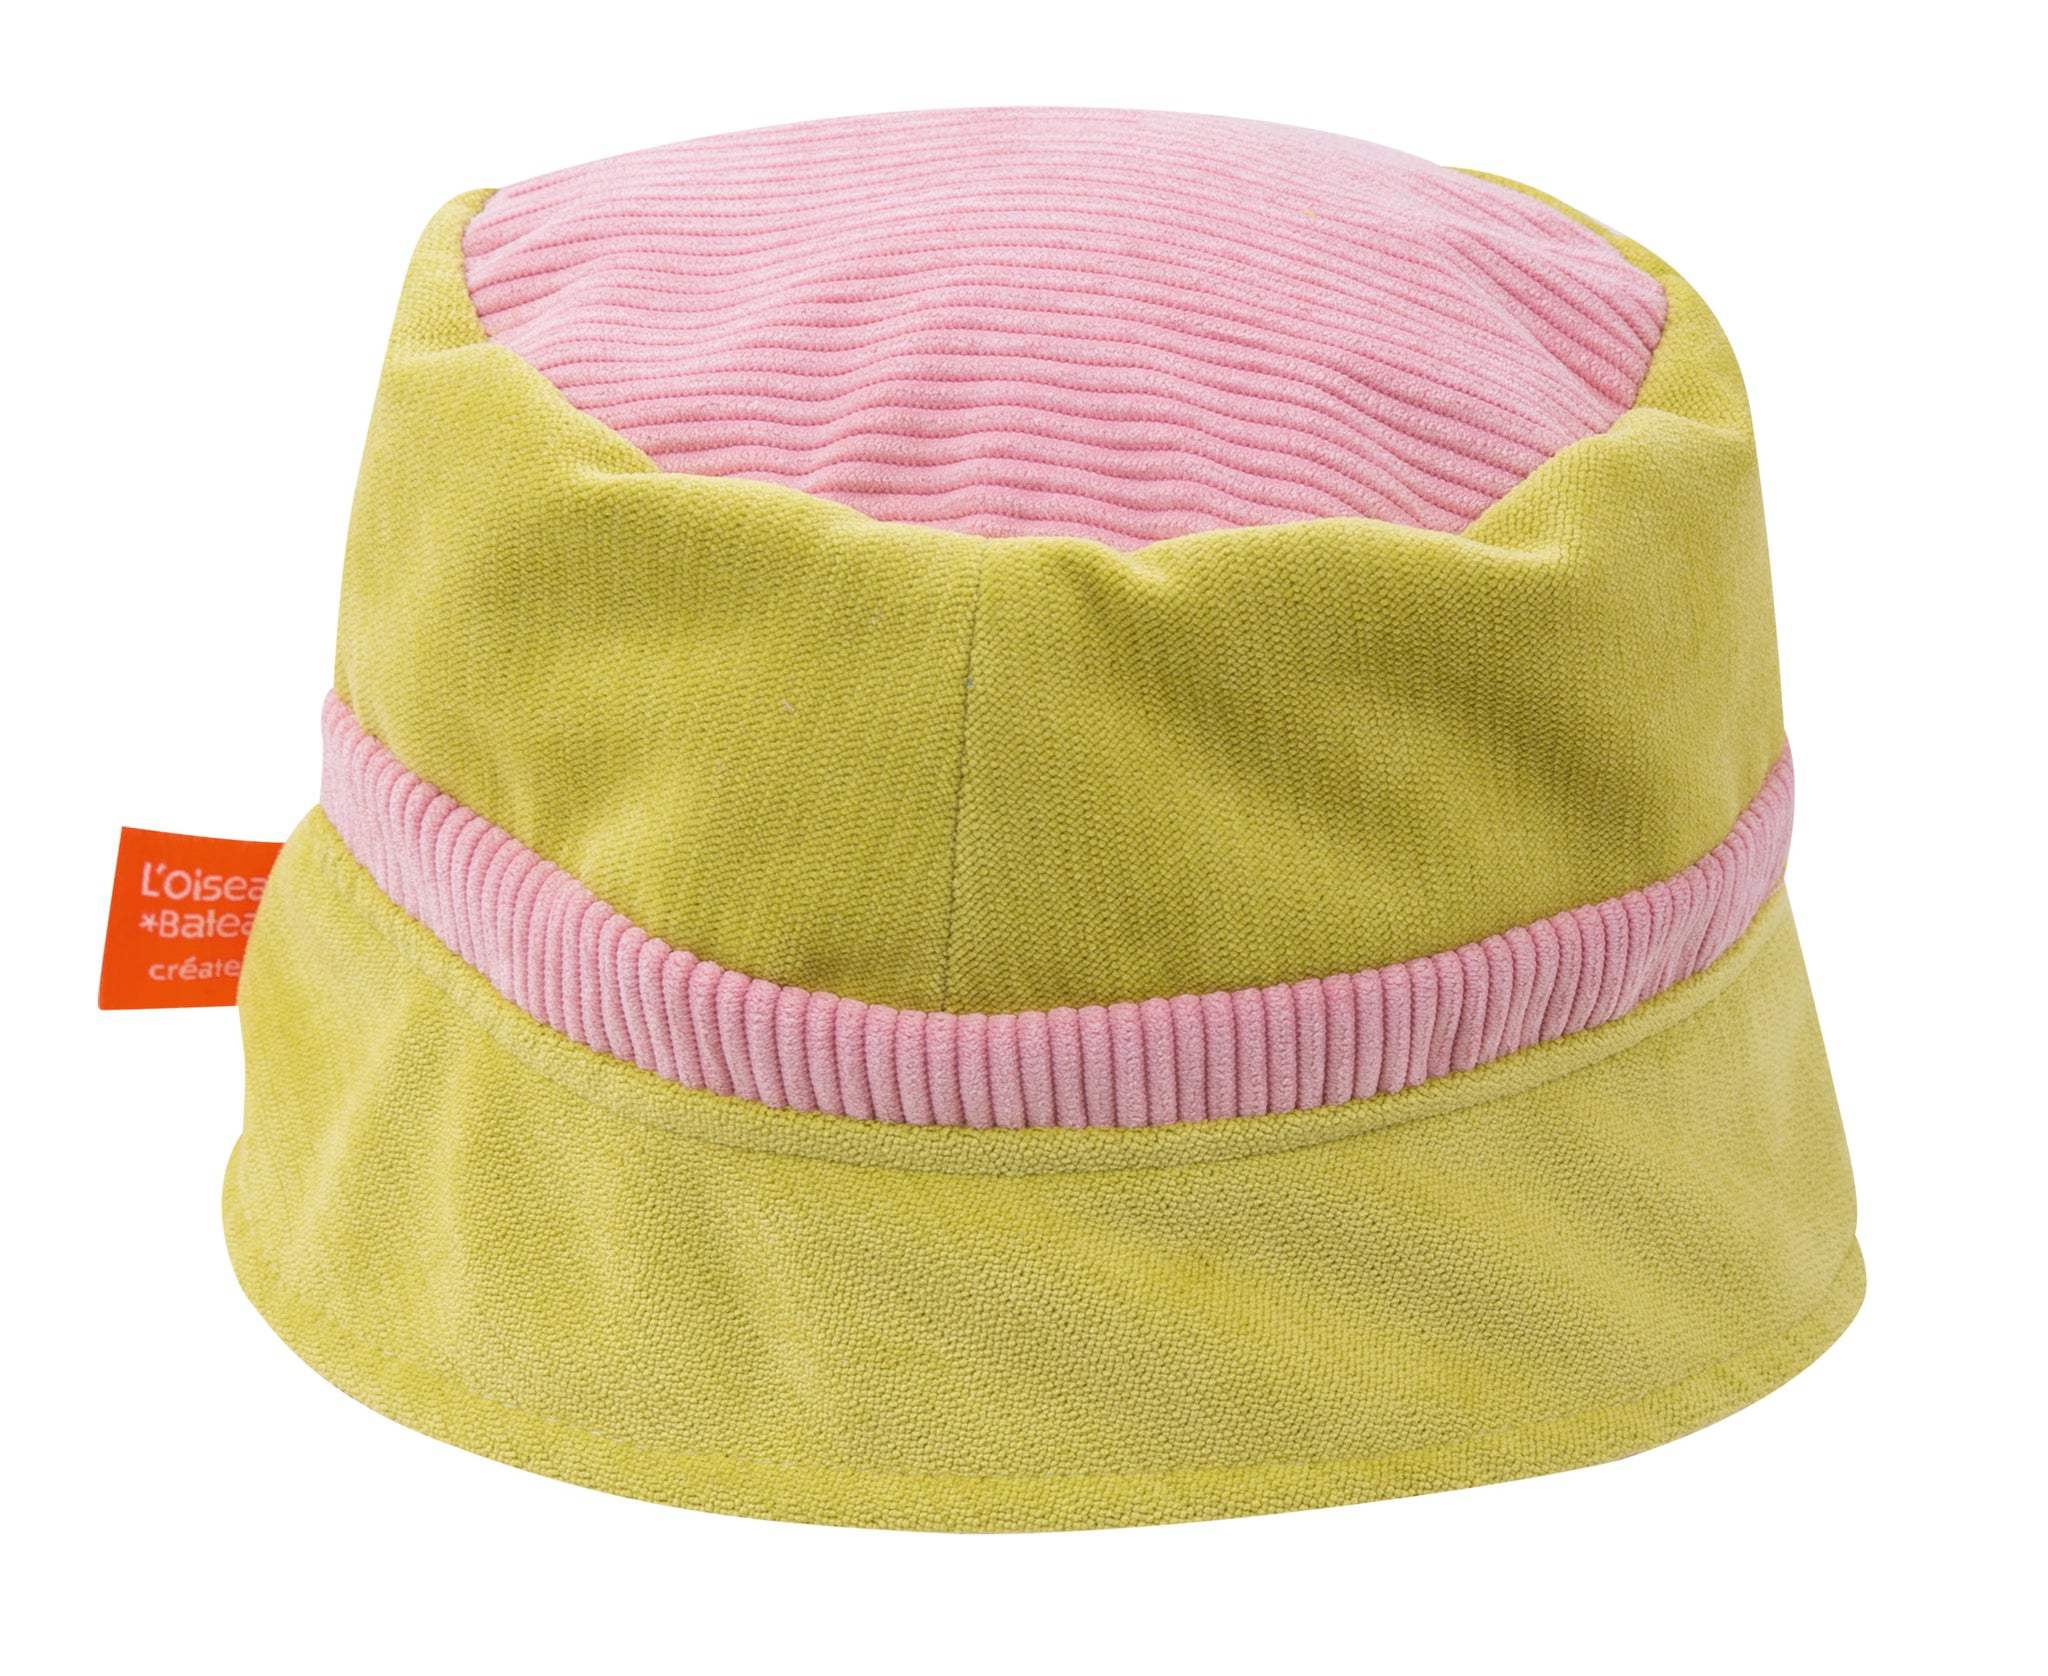 Anise and Rose children's hat